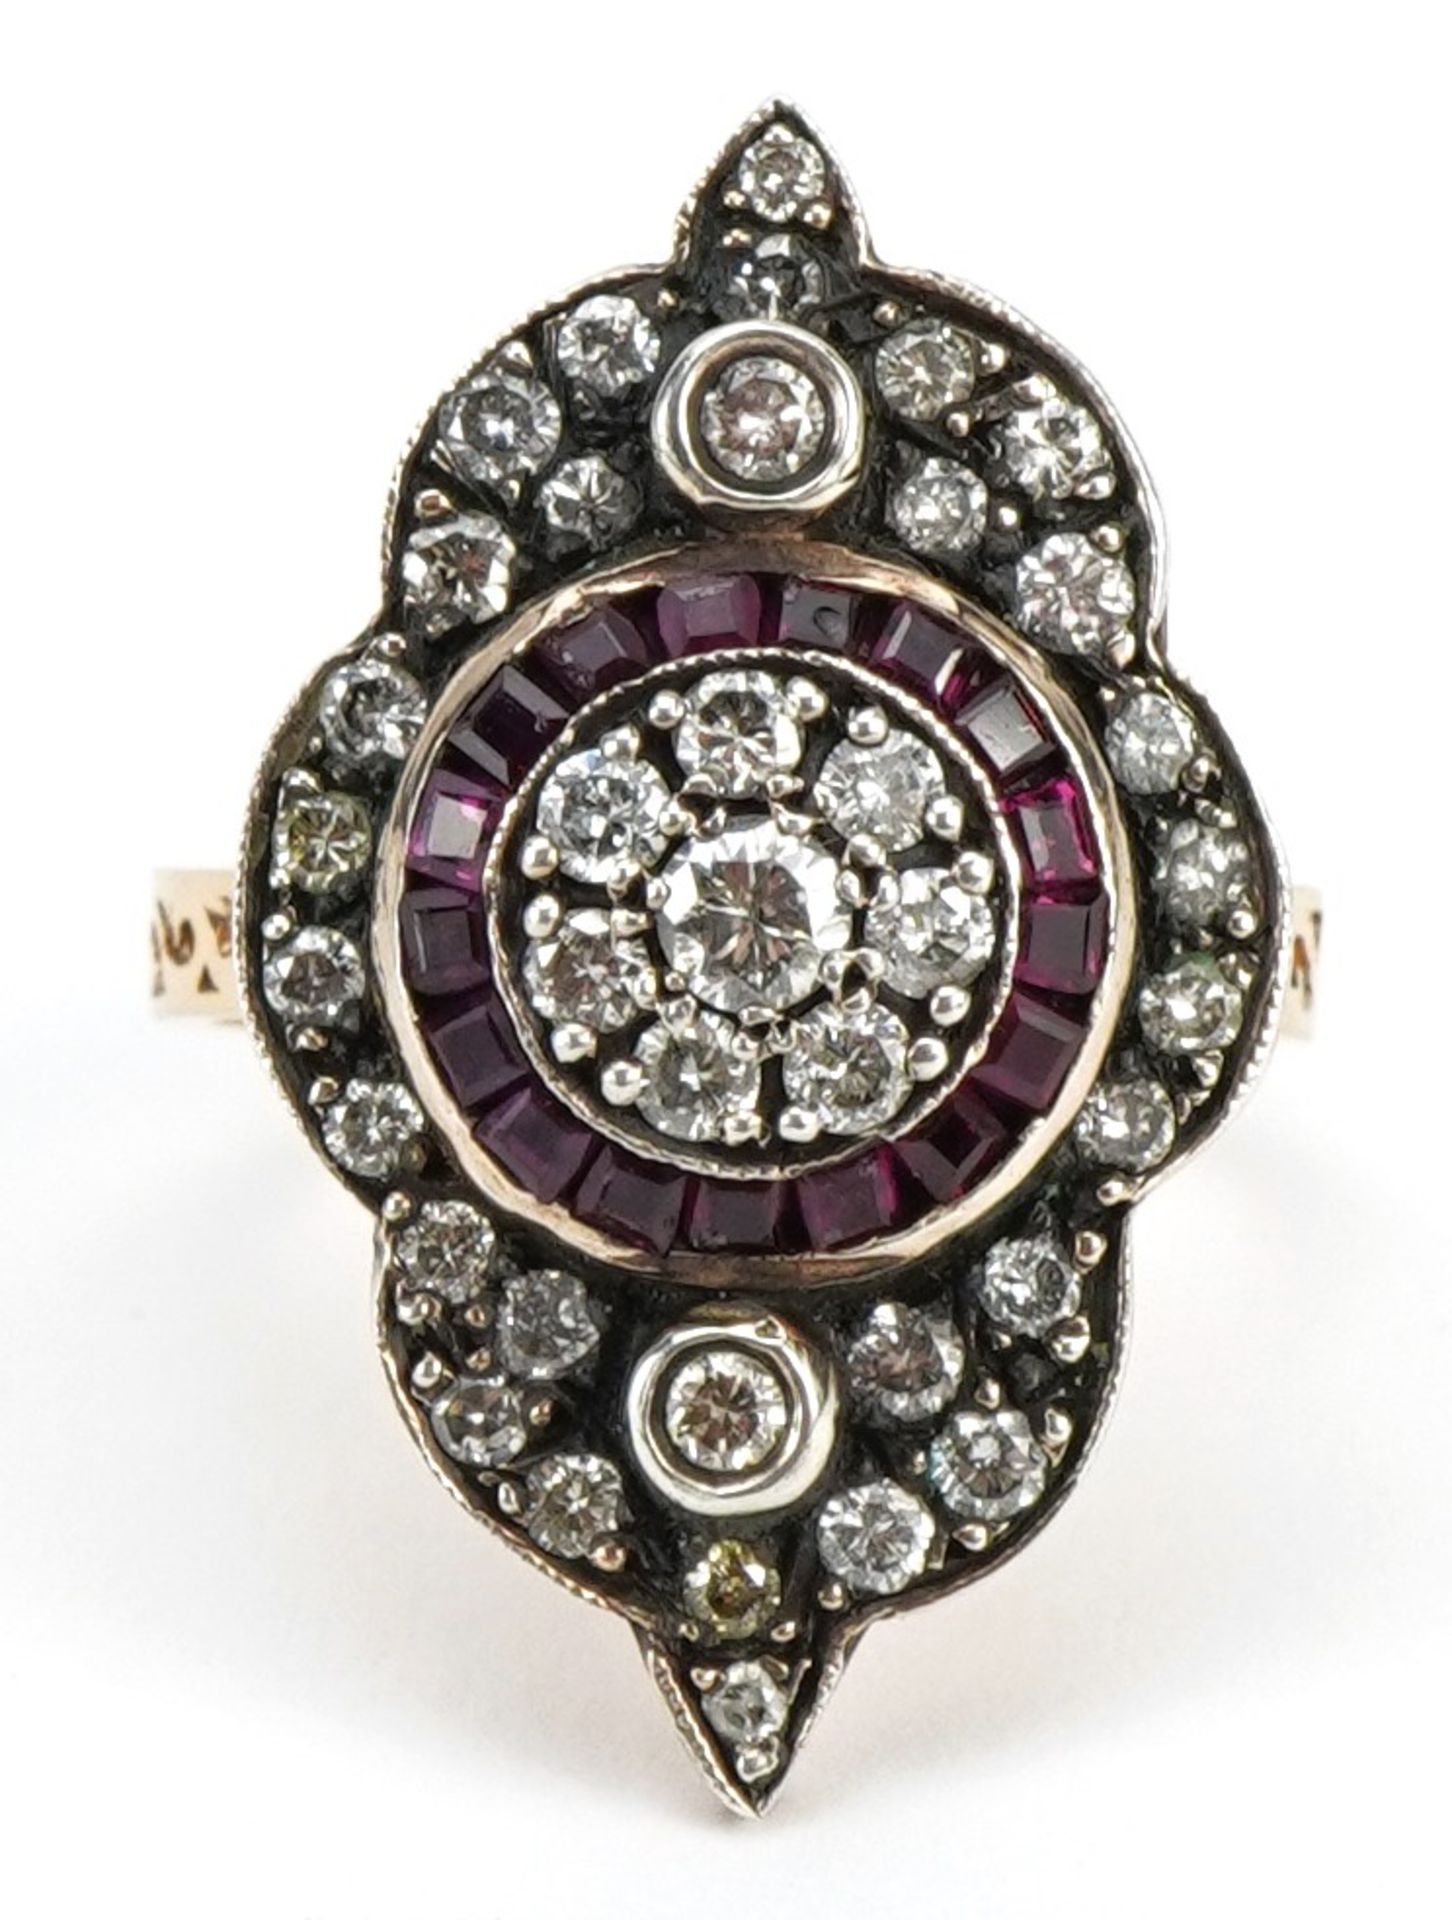 8ct rose gold diamond and ruby cluster ring, total ruby weight approximately 0.58 carat, total